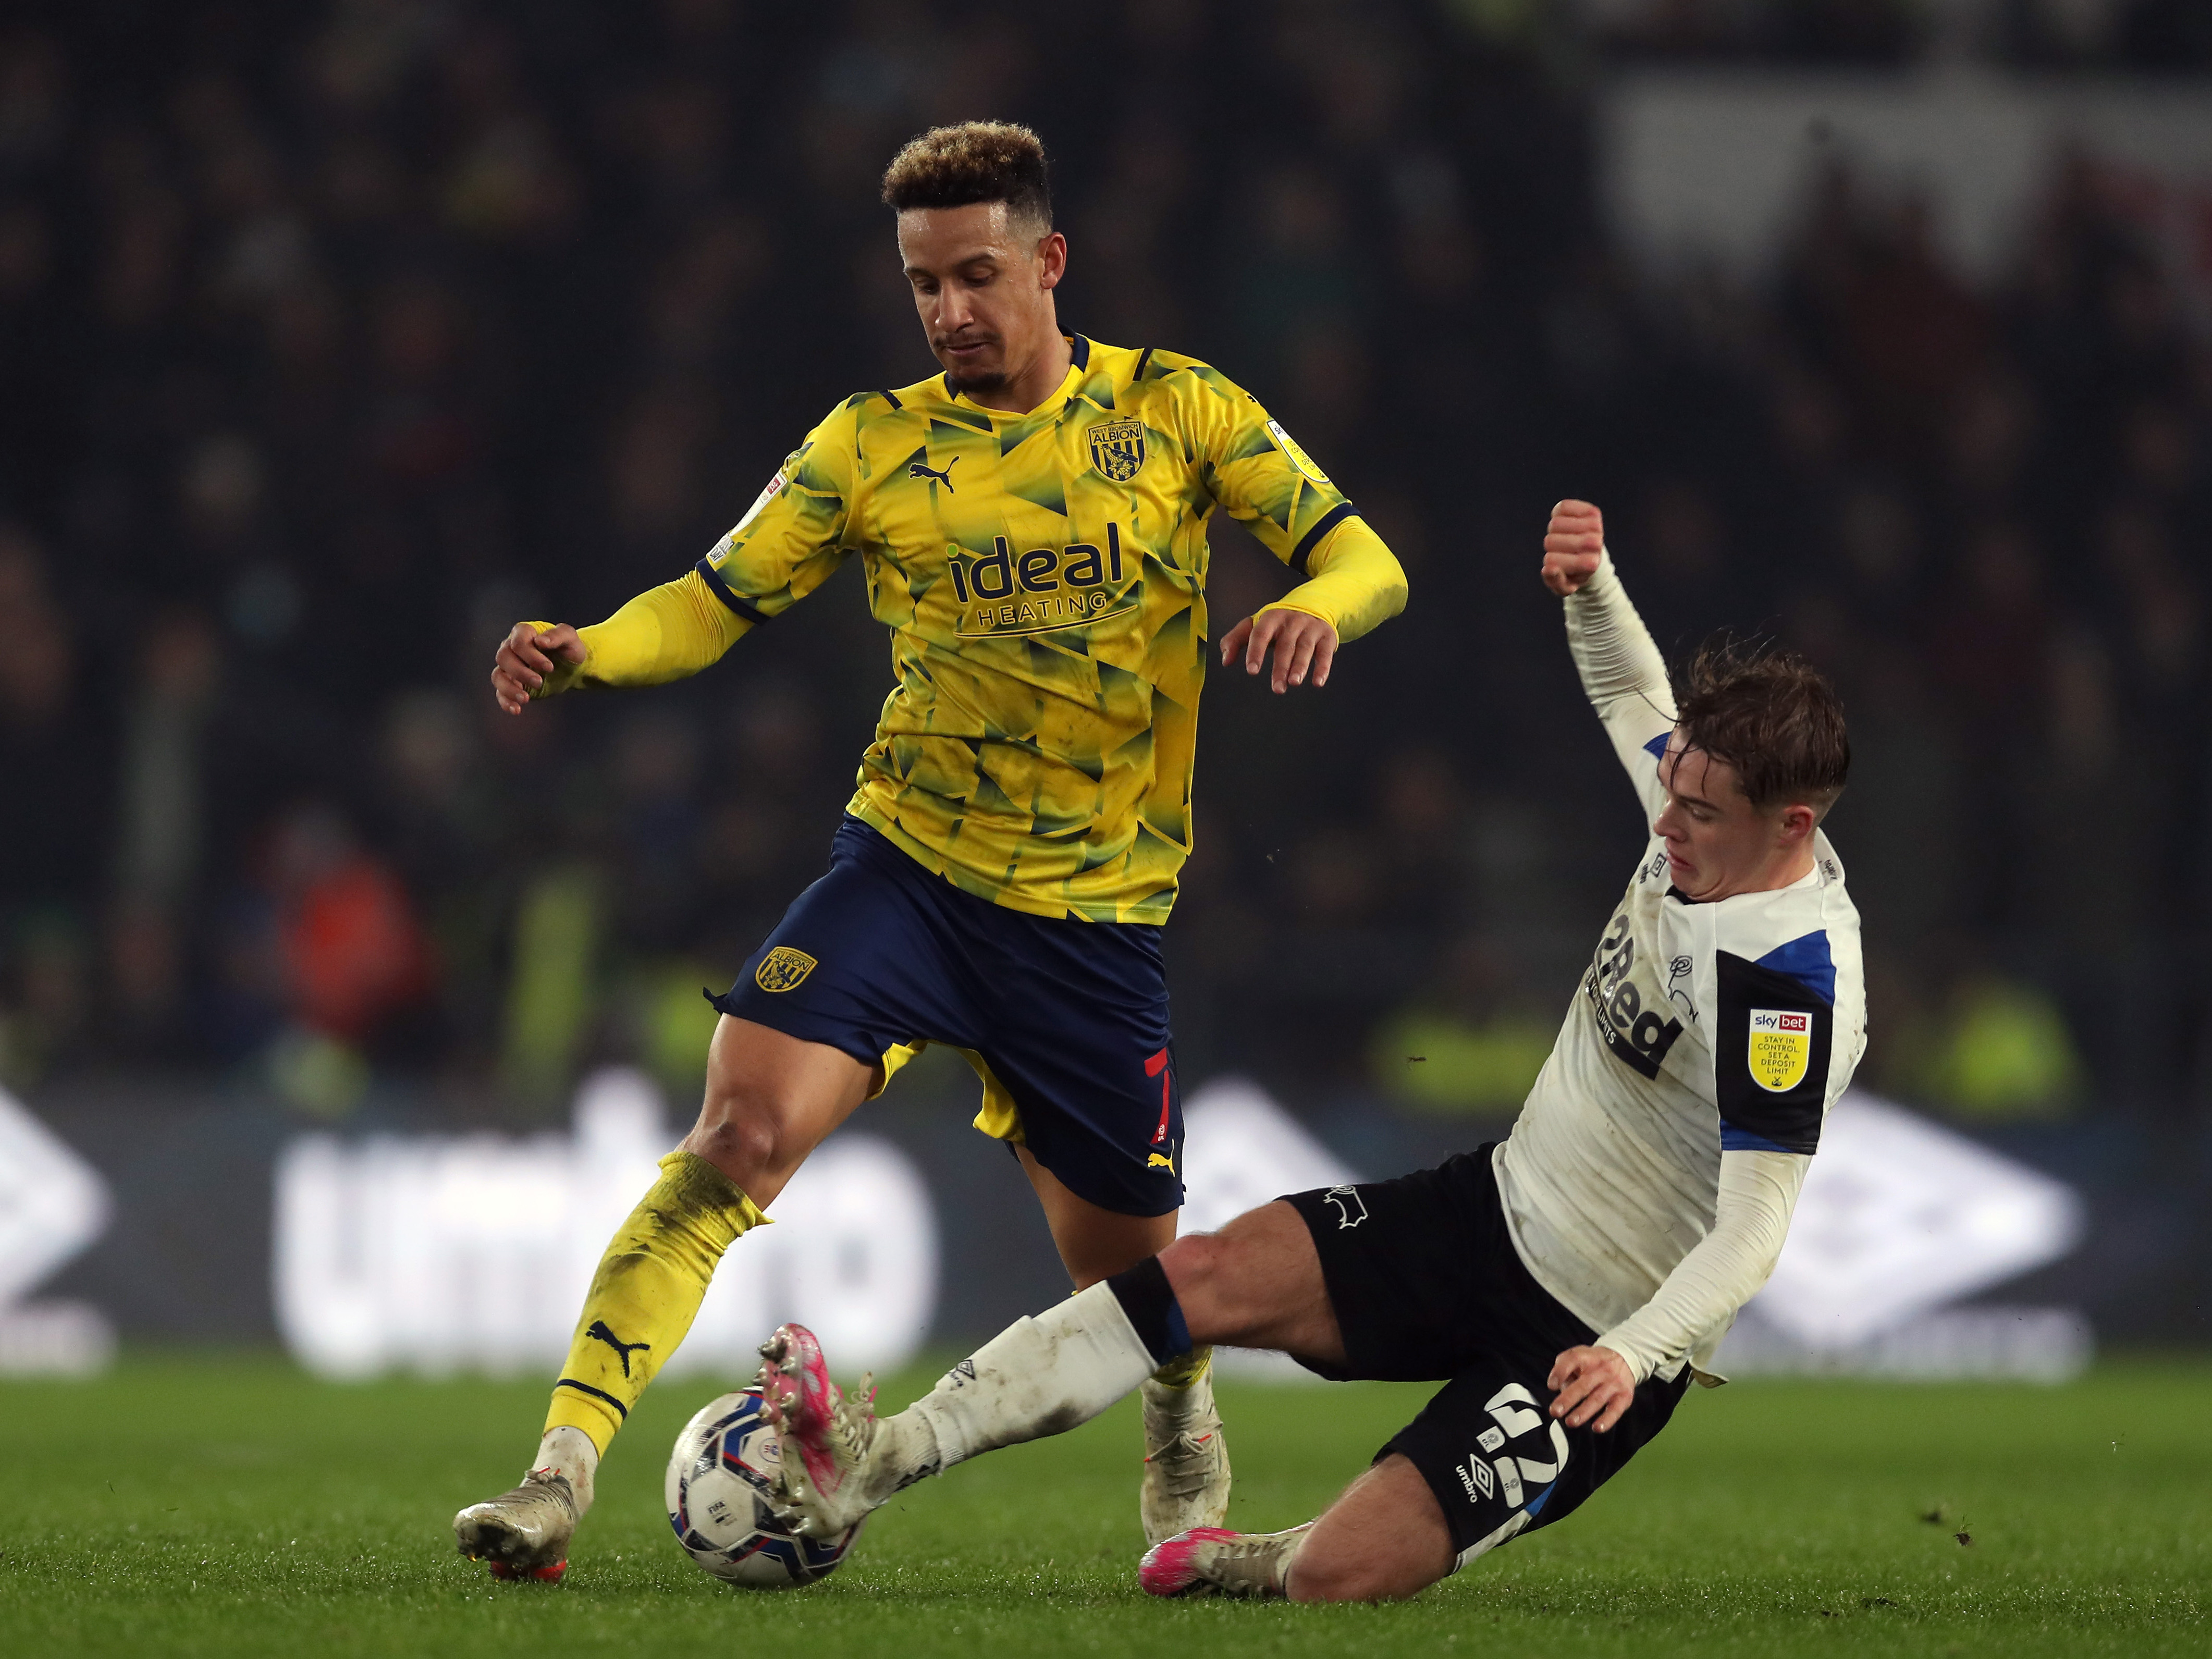 Albion were beaten 1-0 by Derby County in the Sky Bet Championship on Monday afternoon